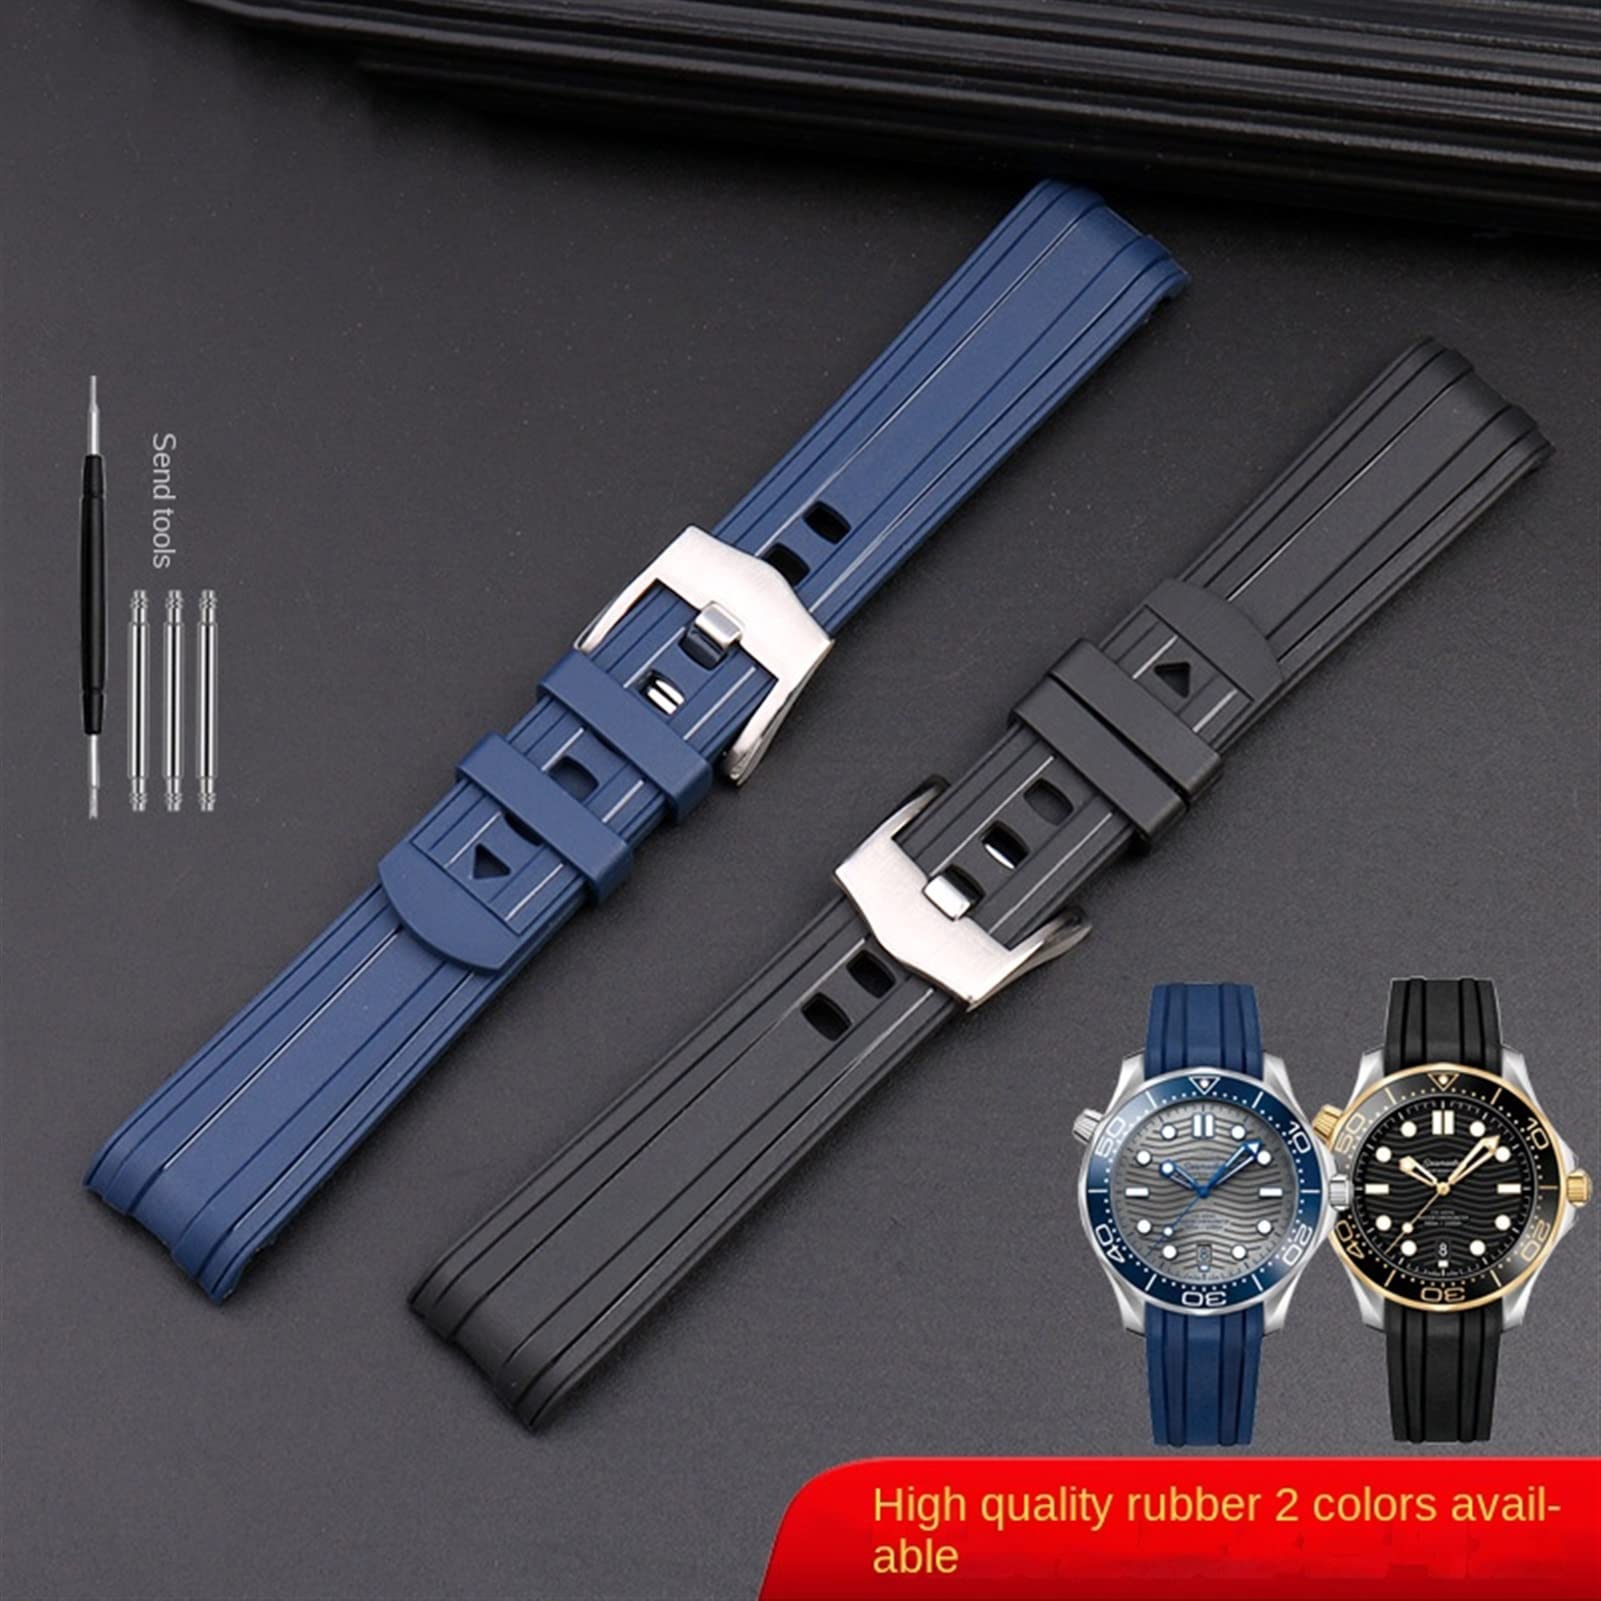 Wscebck for Omega Seamaster 300 Universe 007 Curved End Fluorous Rubber Silicone watchband 20mm 22m Watch Soft Strap Men Replacement (Color : Blue Silver, Size : 20mm)